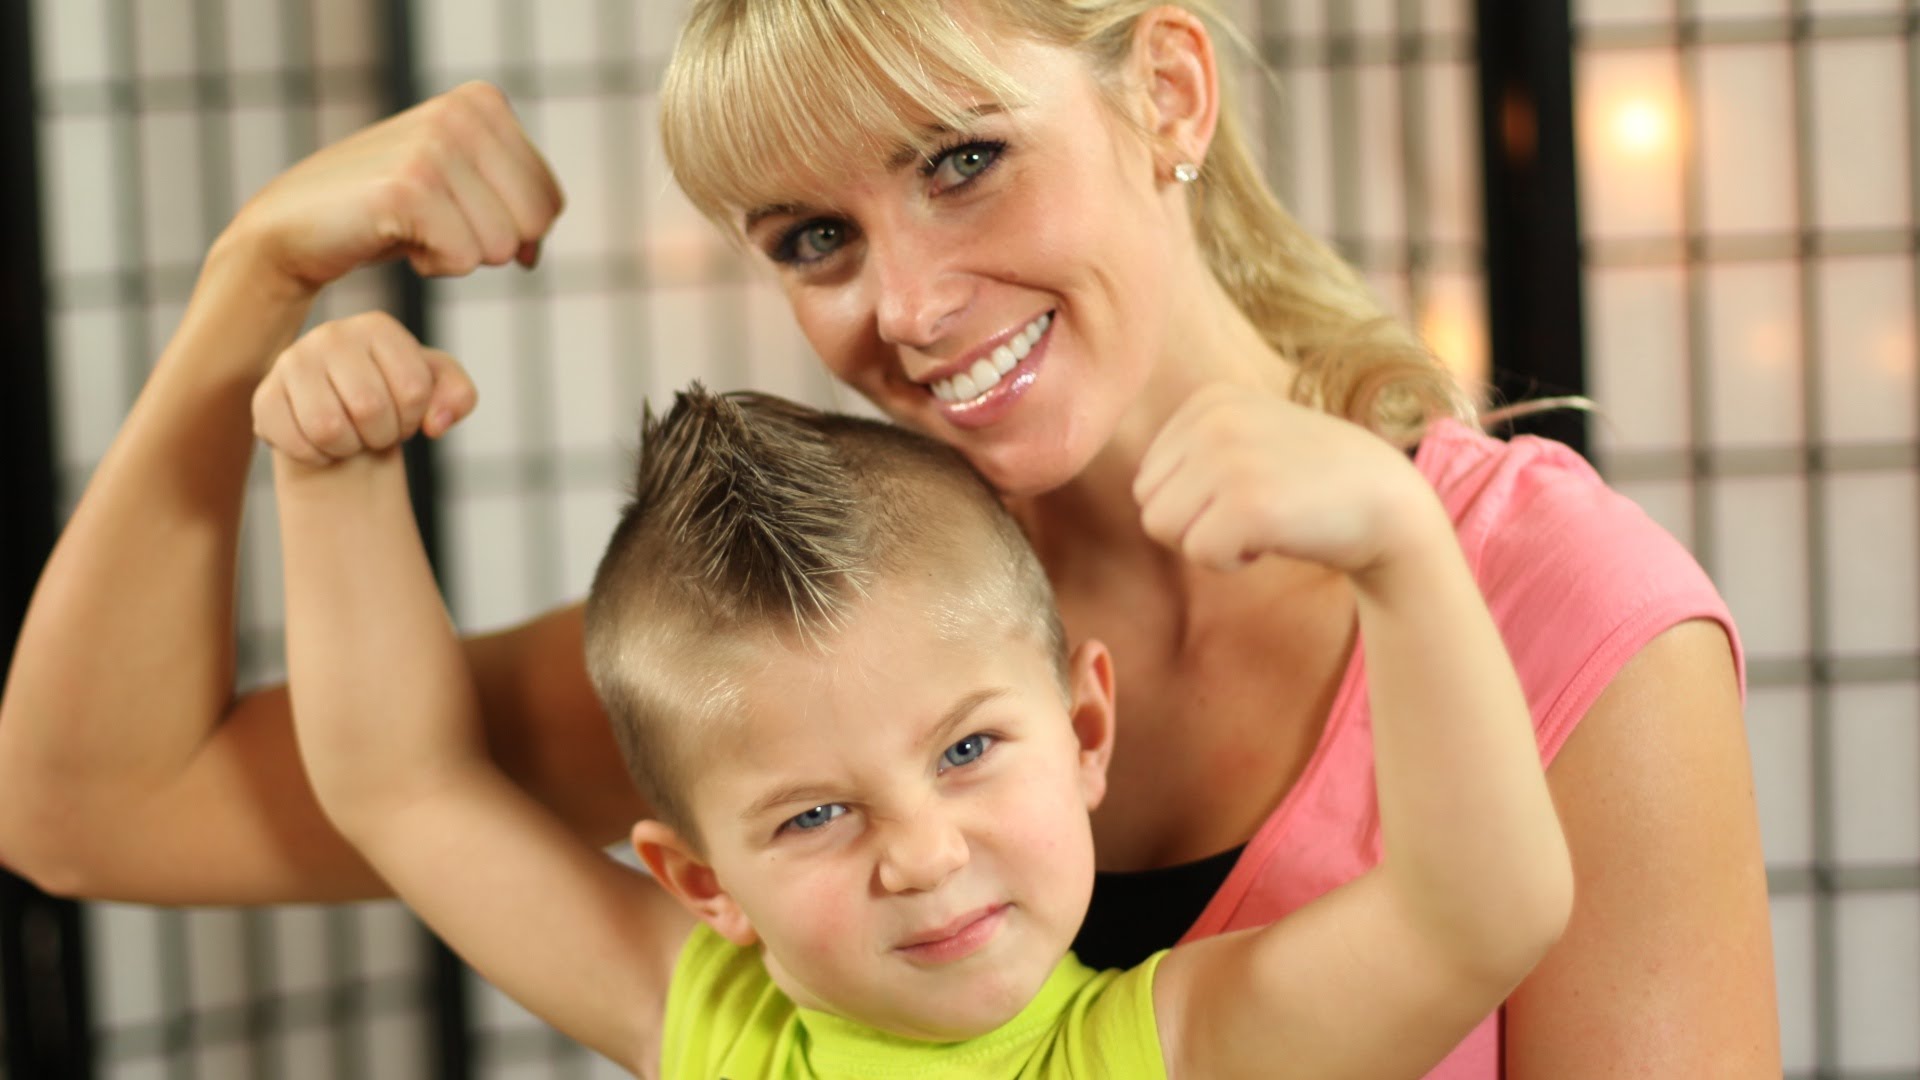 5 Tips To Increase Your Children’s Exercise and Help Their Mental Health